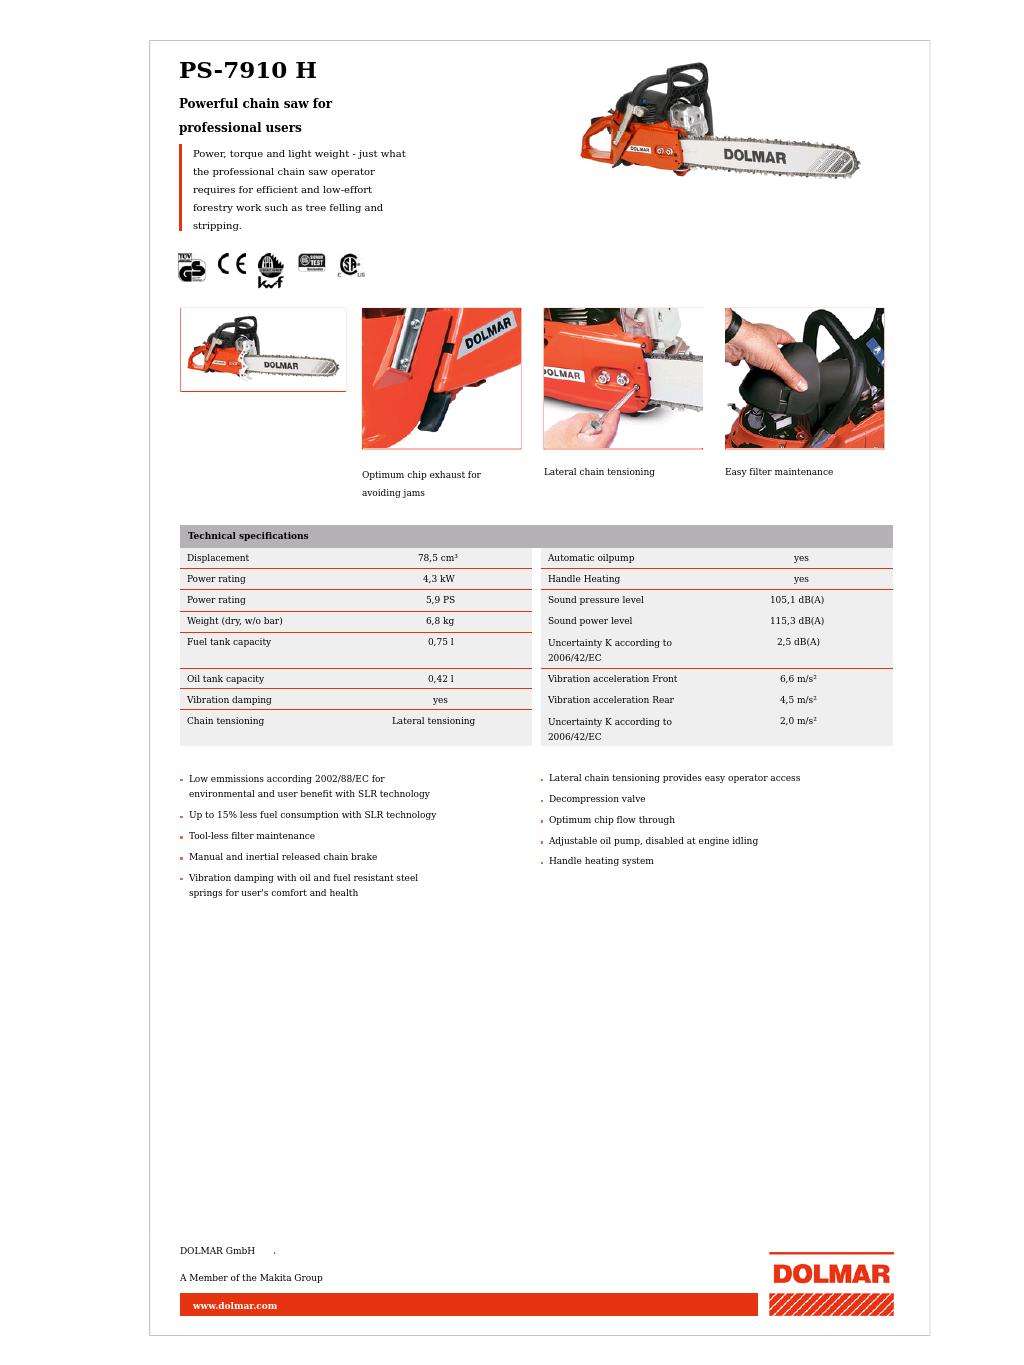 Powerful Chain Saw for Professional Users PS-7910 H